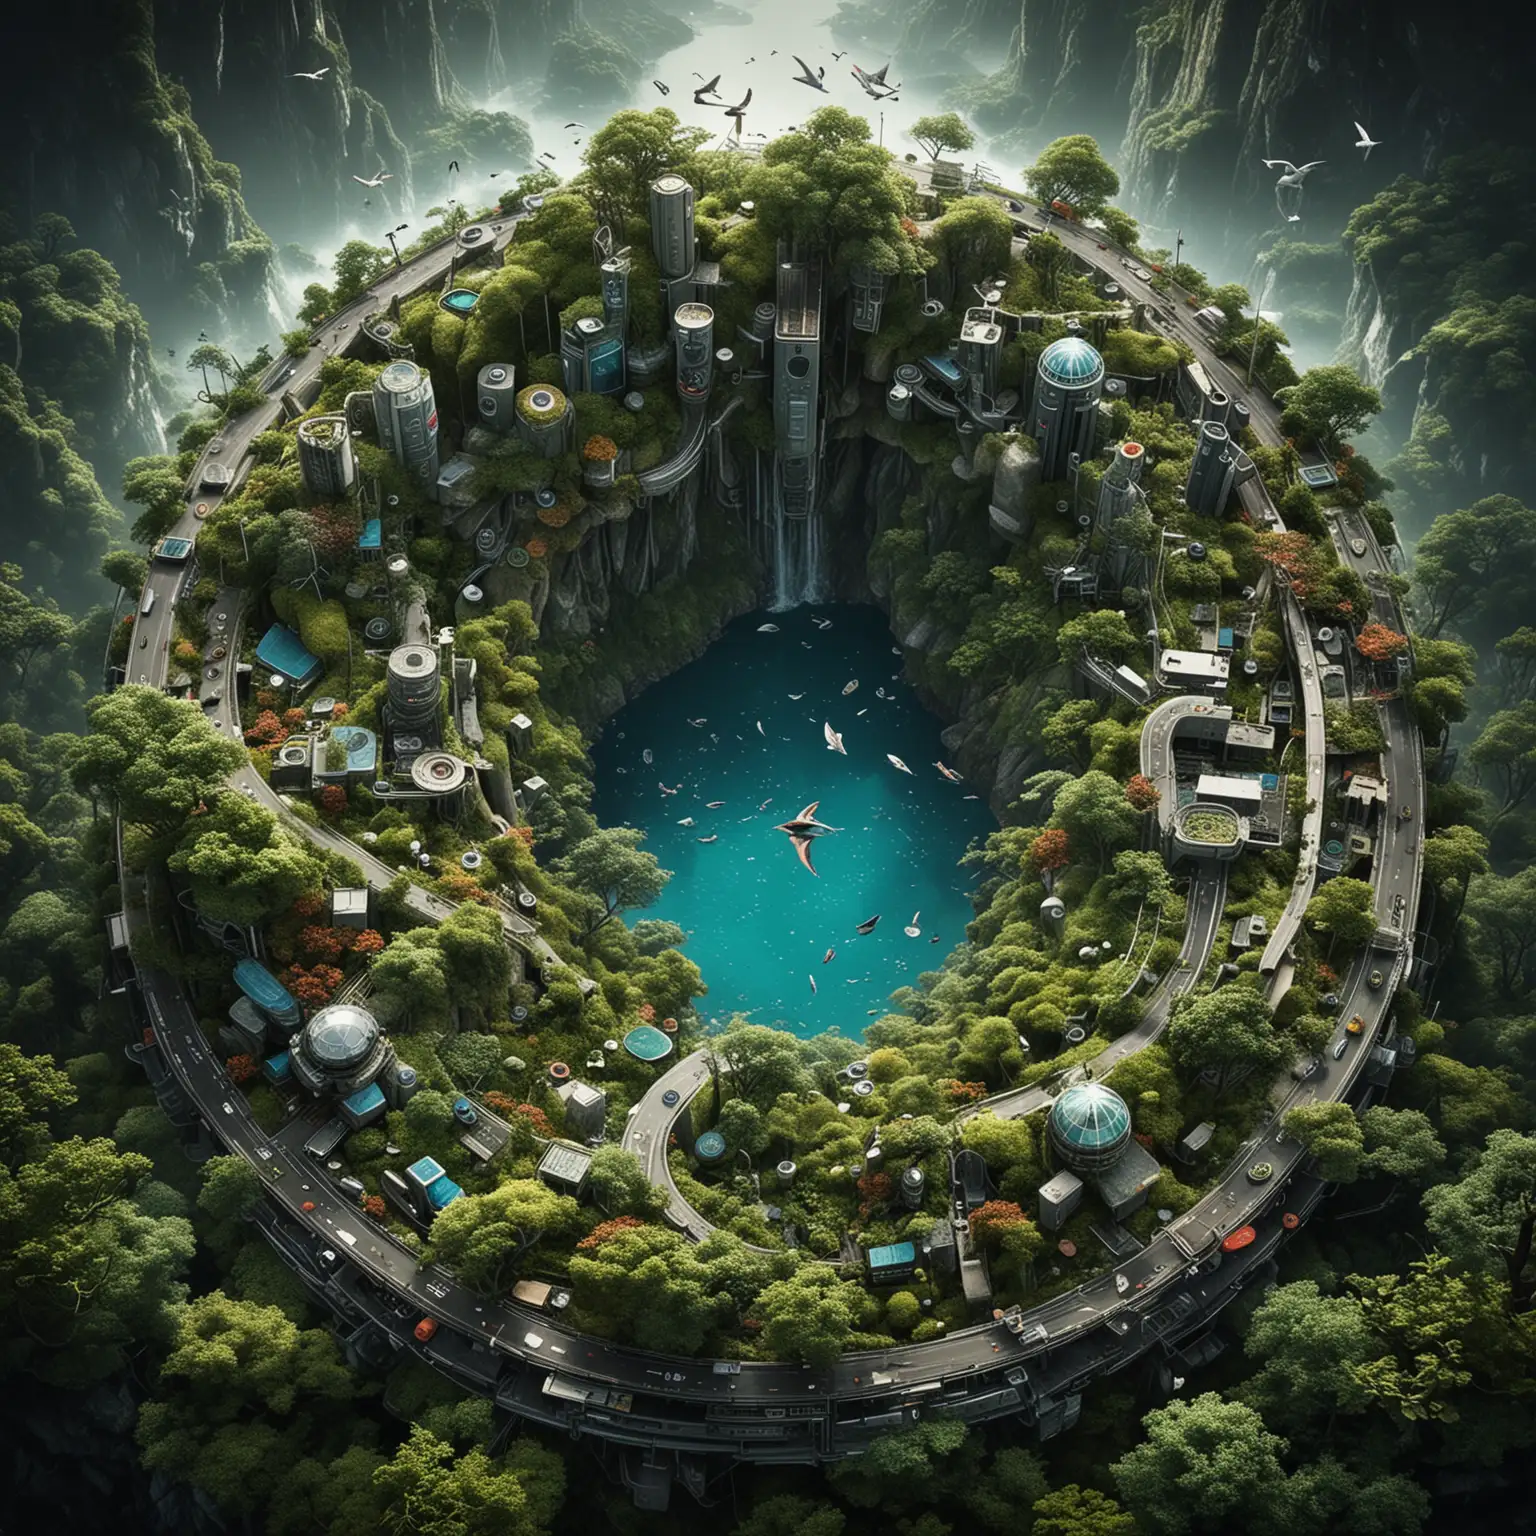 Create for me a bird's eye view of an imaginary fantasy world of advanced technology and nature, realistic